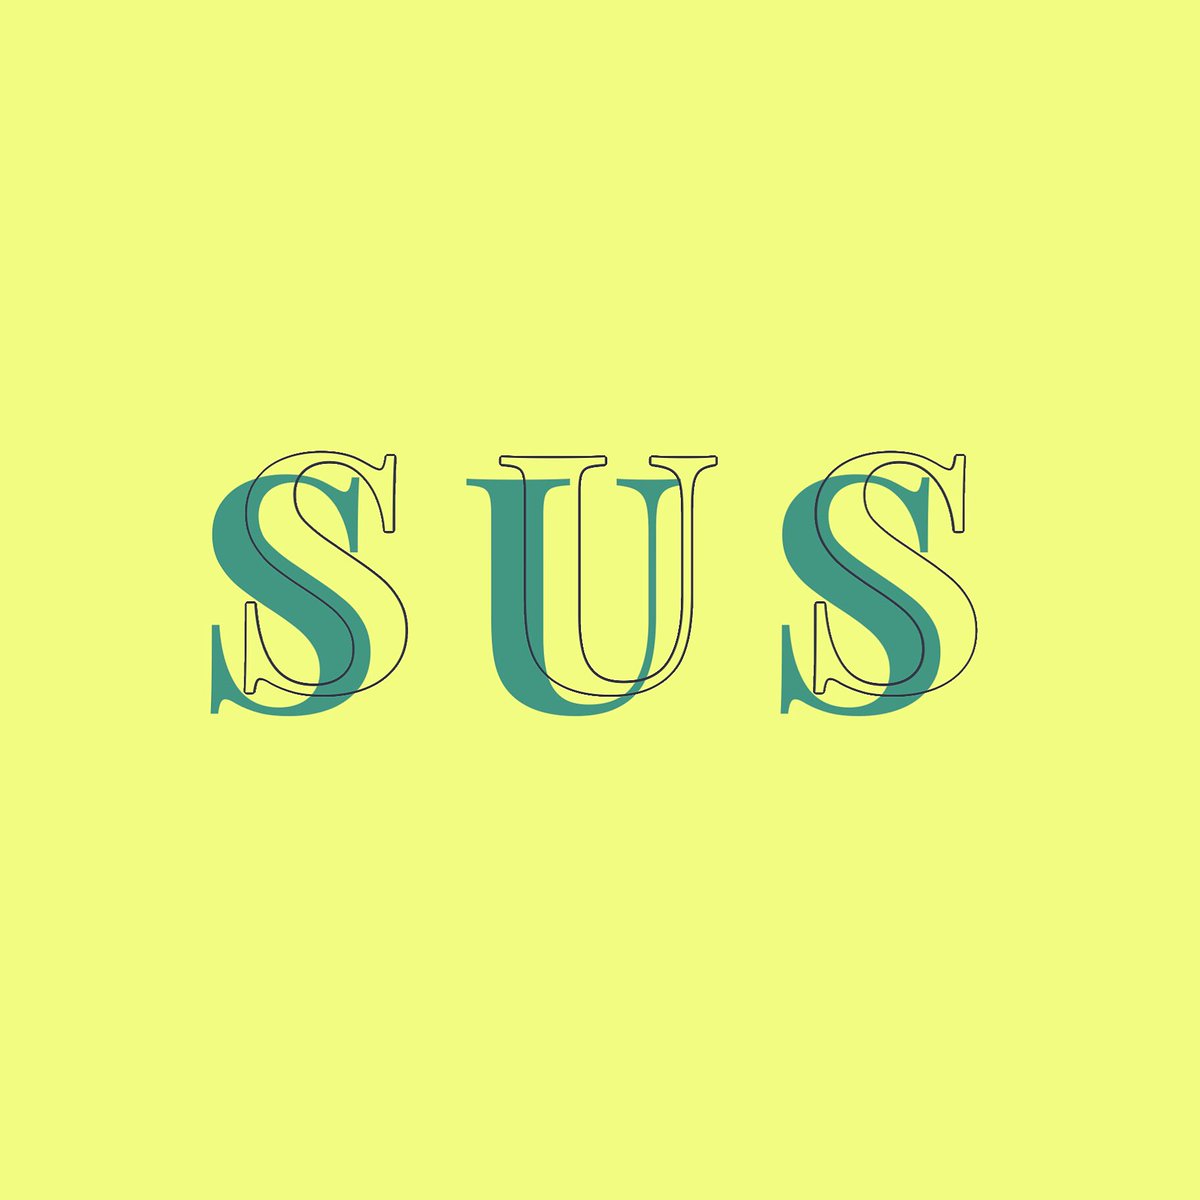 how do you break out of fast-fashion’s mindless consumerism and destructive supply chains? shop SUS. coming soon. #shopsustainable #shopsustainably #shopsustainablefashion #sus #shopsus #comingsoon #fastfashion #fuckfastfashion #whomadeyourclothes #asos #plt #boohoo #topshop